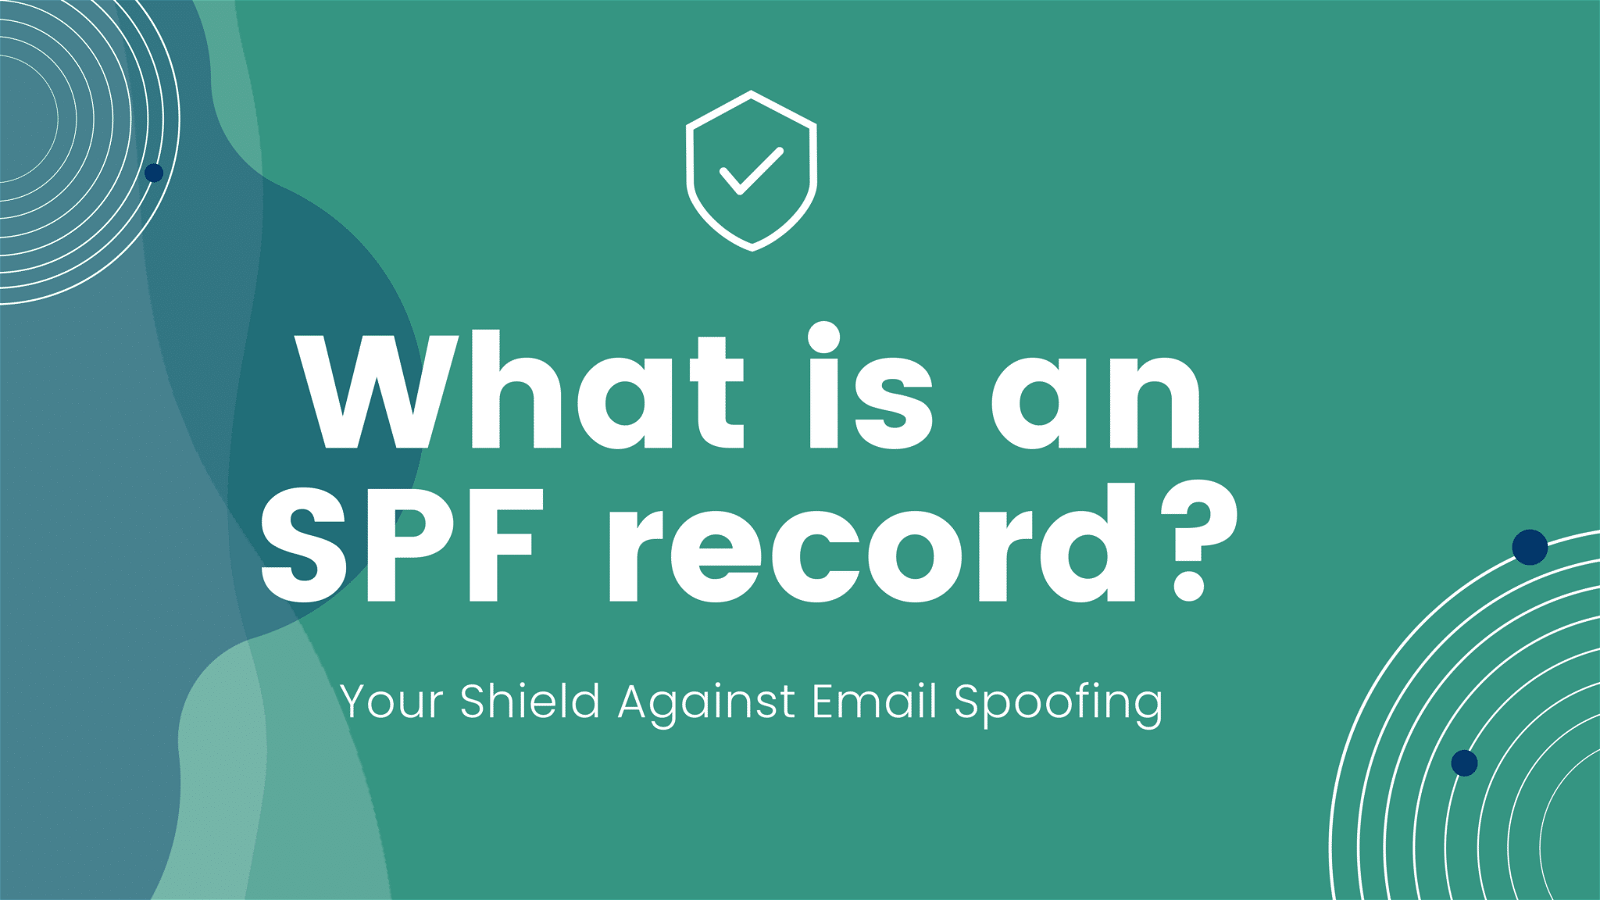 This image explains how an SPF record can be used to protect against email spoofing.